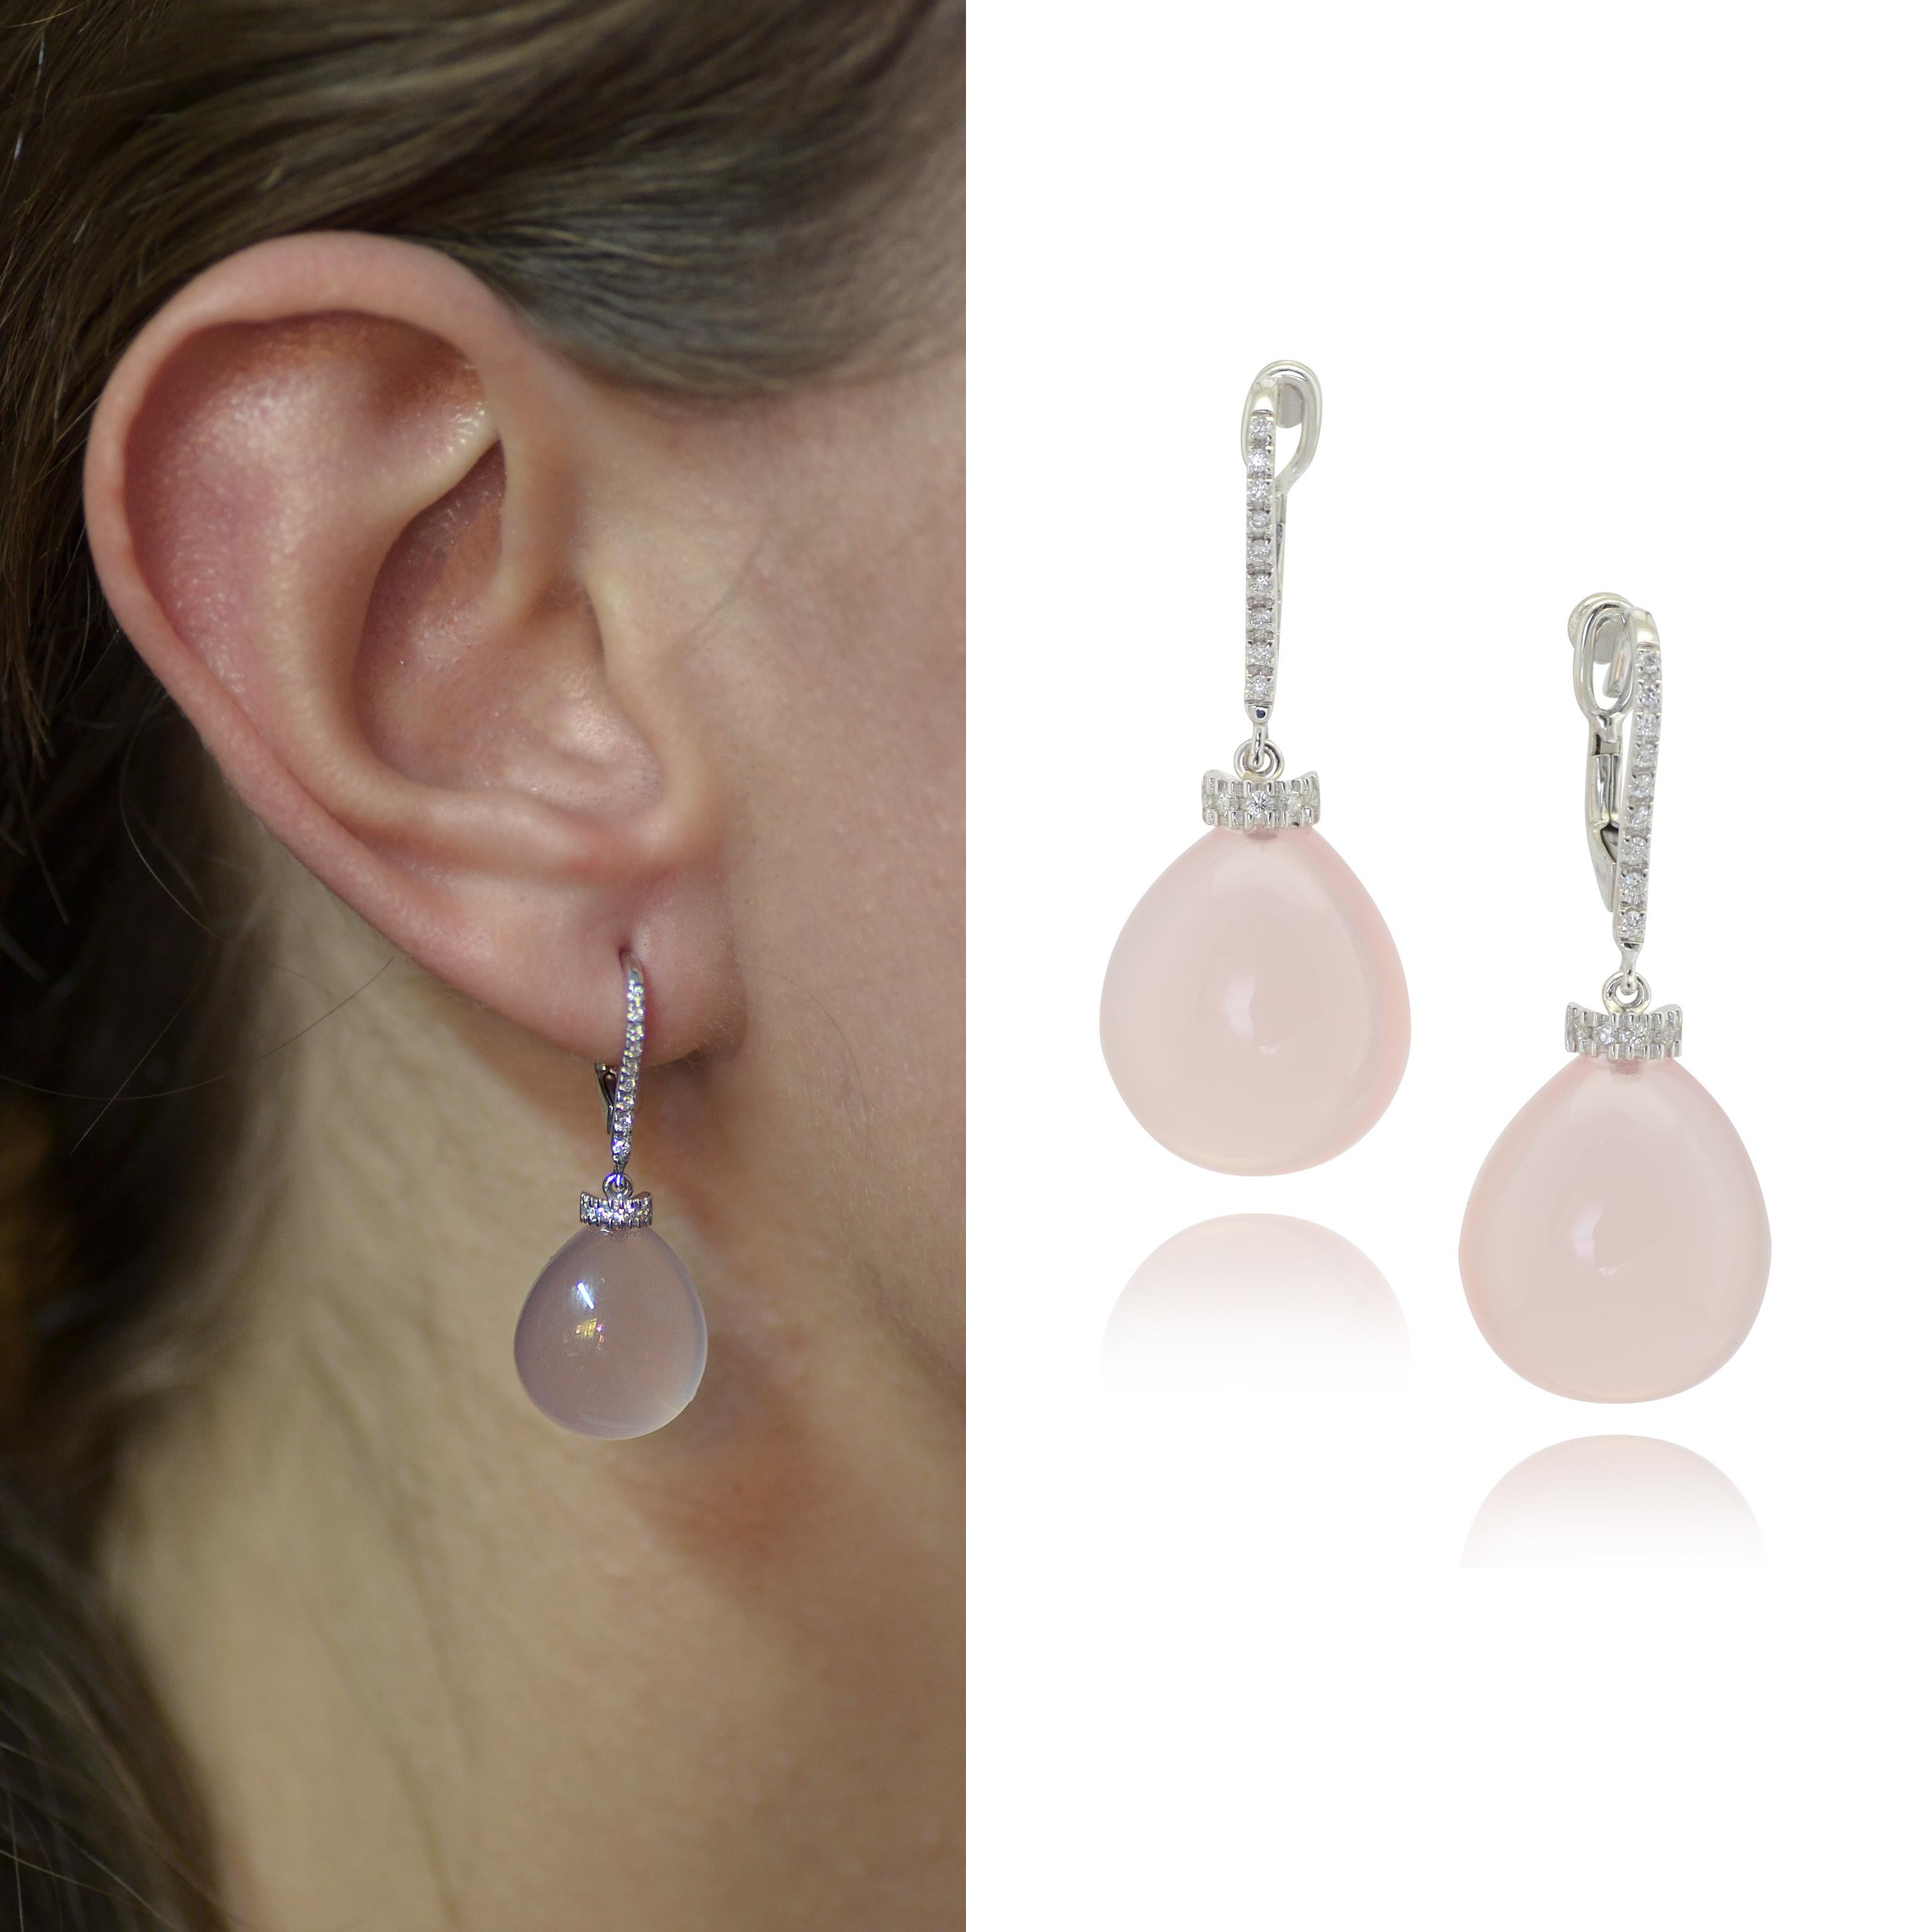 Handcrafted in Margherita Burgener family workshop, based in Italy,  the Gattopardo earrings are characterized by a cabochon cut pendant drop in pink quartz and a hook set by high quality diamonds , 

Inspired by the scene of Claudia Cardinale